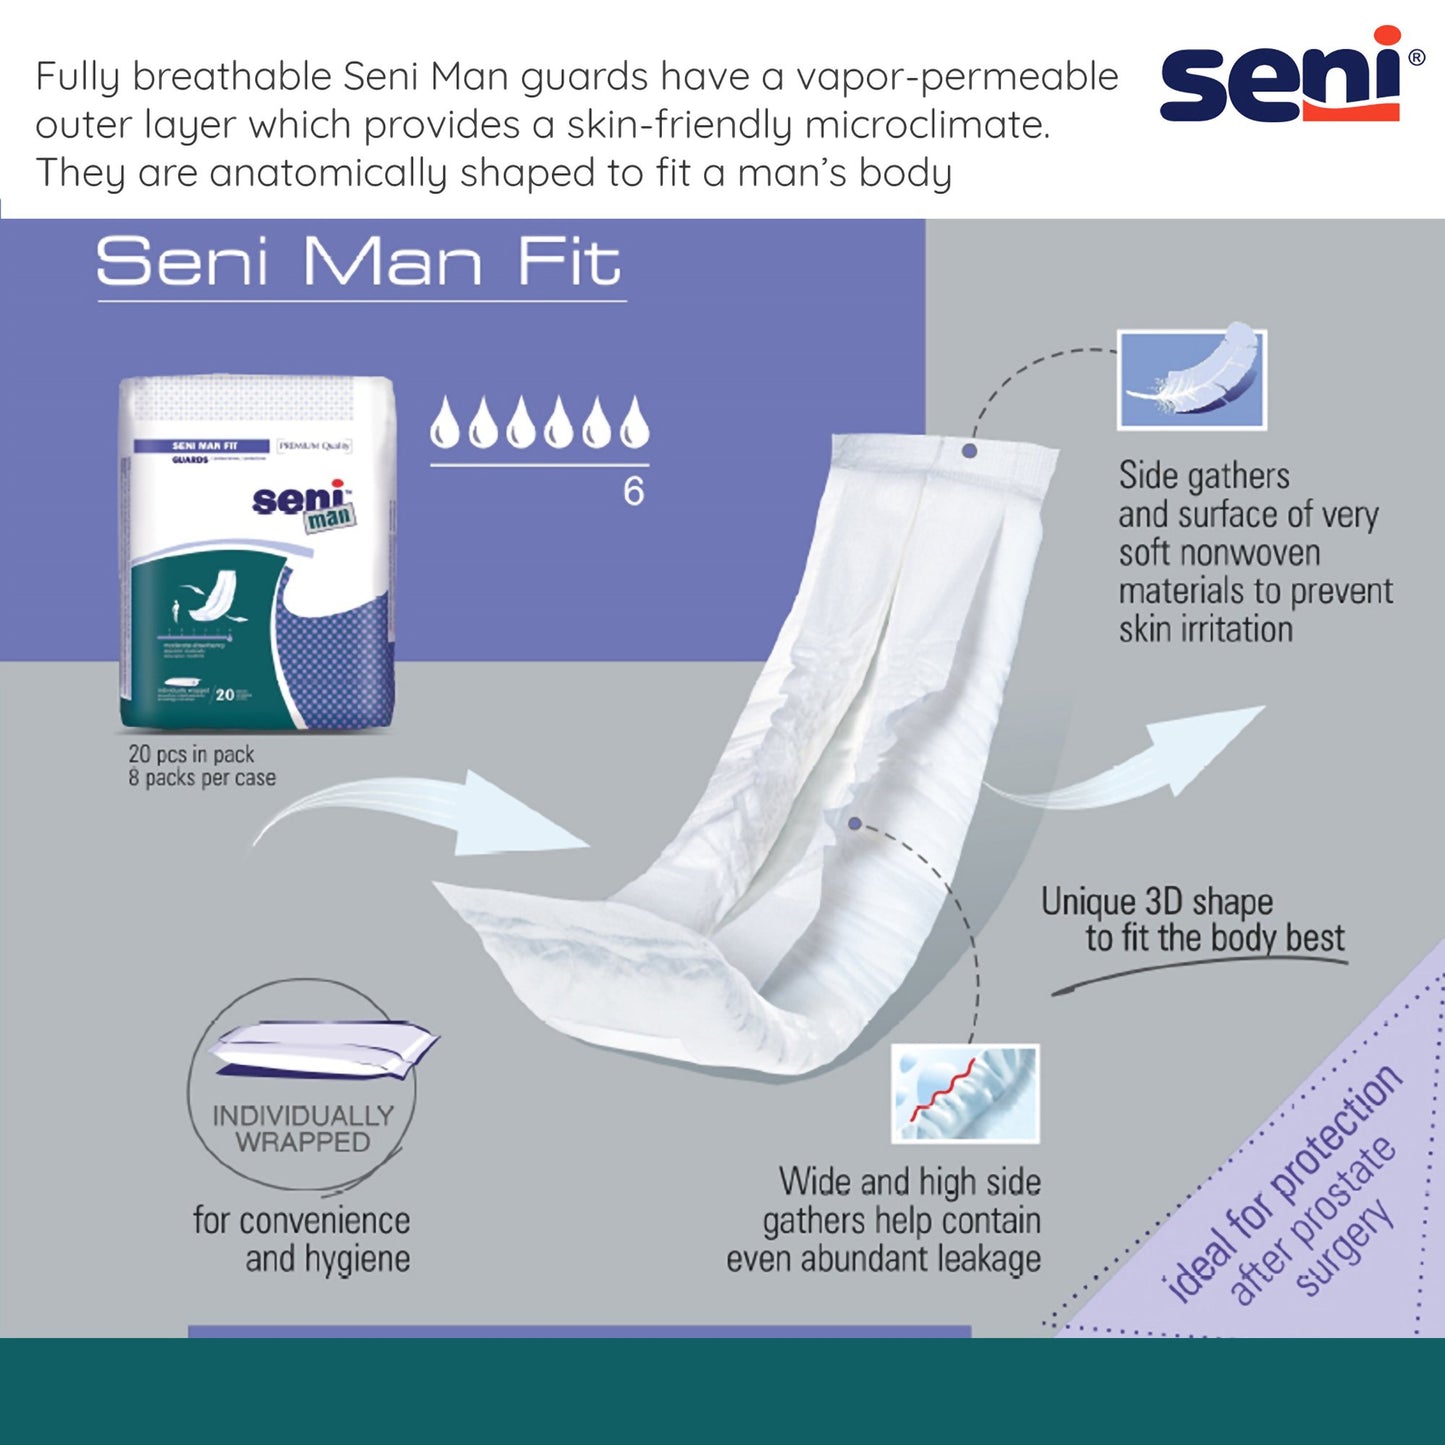 Seni® Man Moderate Absorbency Incontinence Liner, 15.7" Length